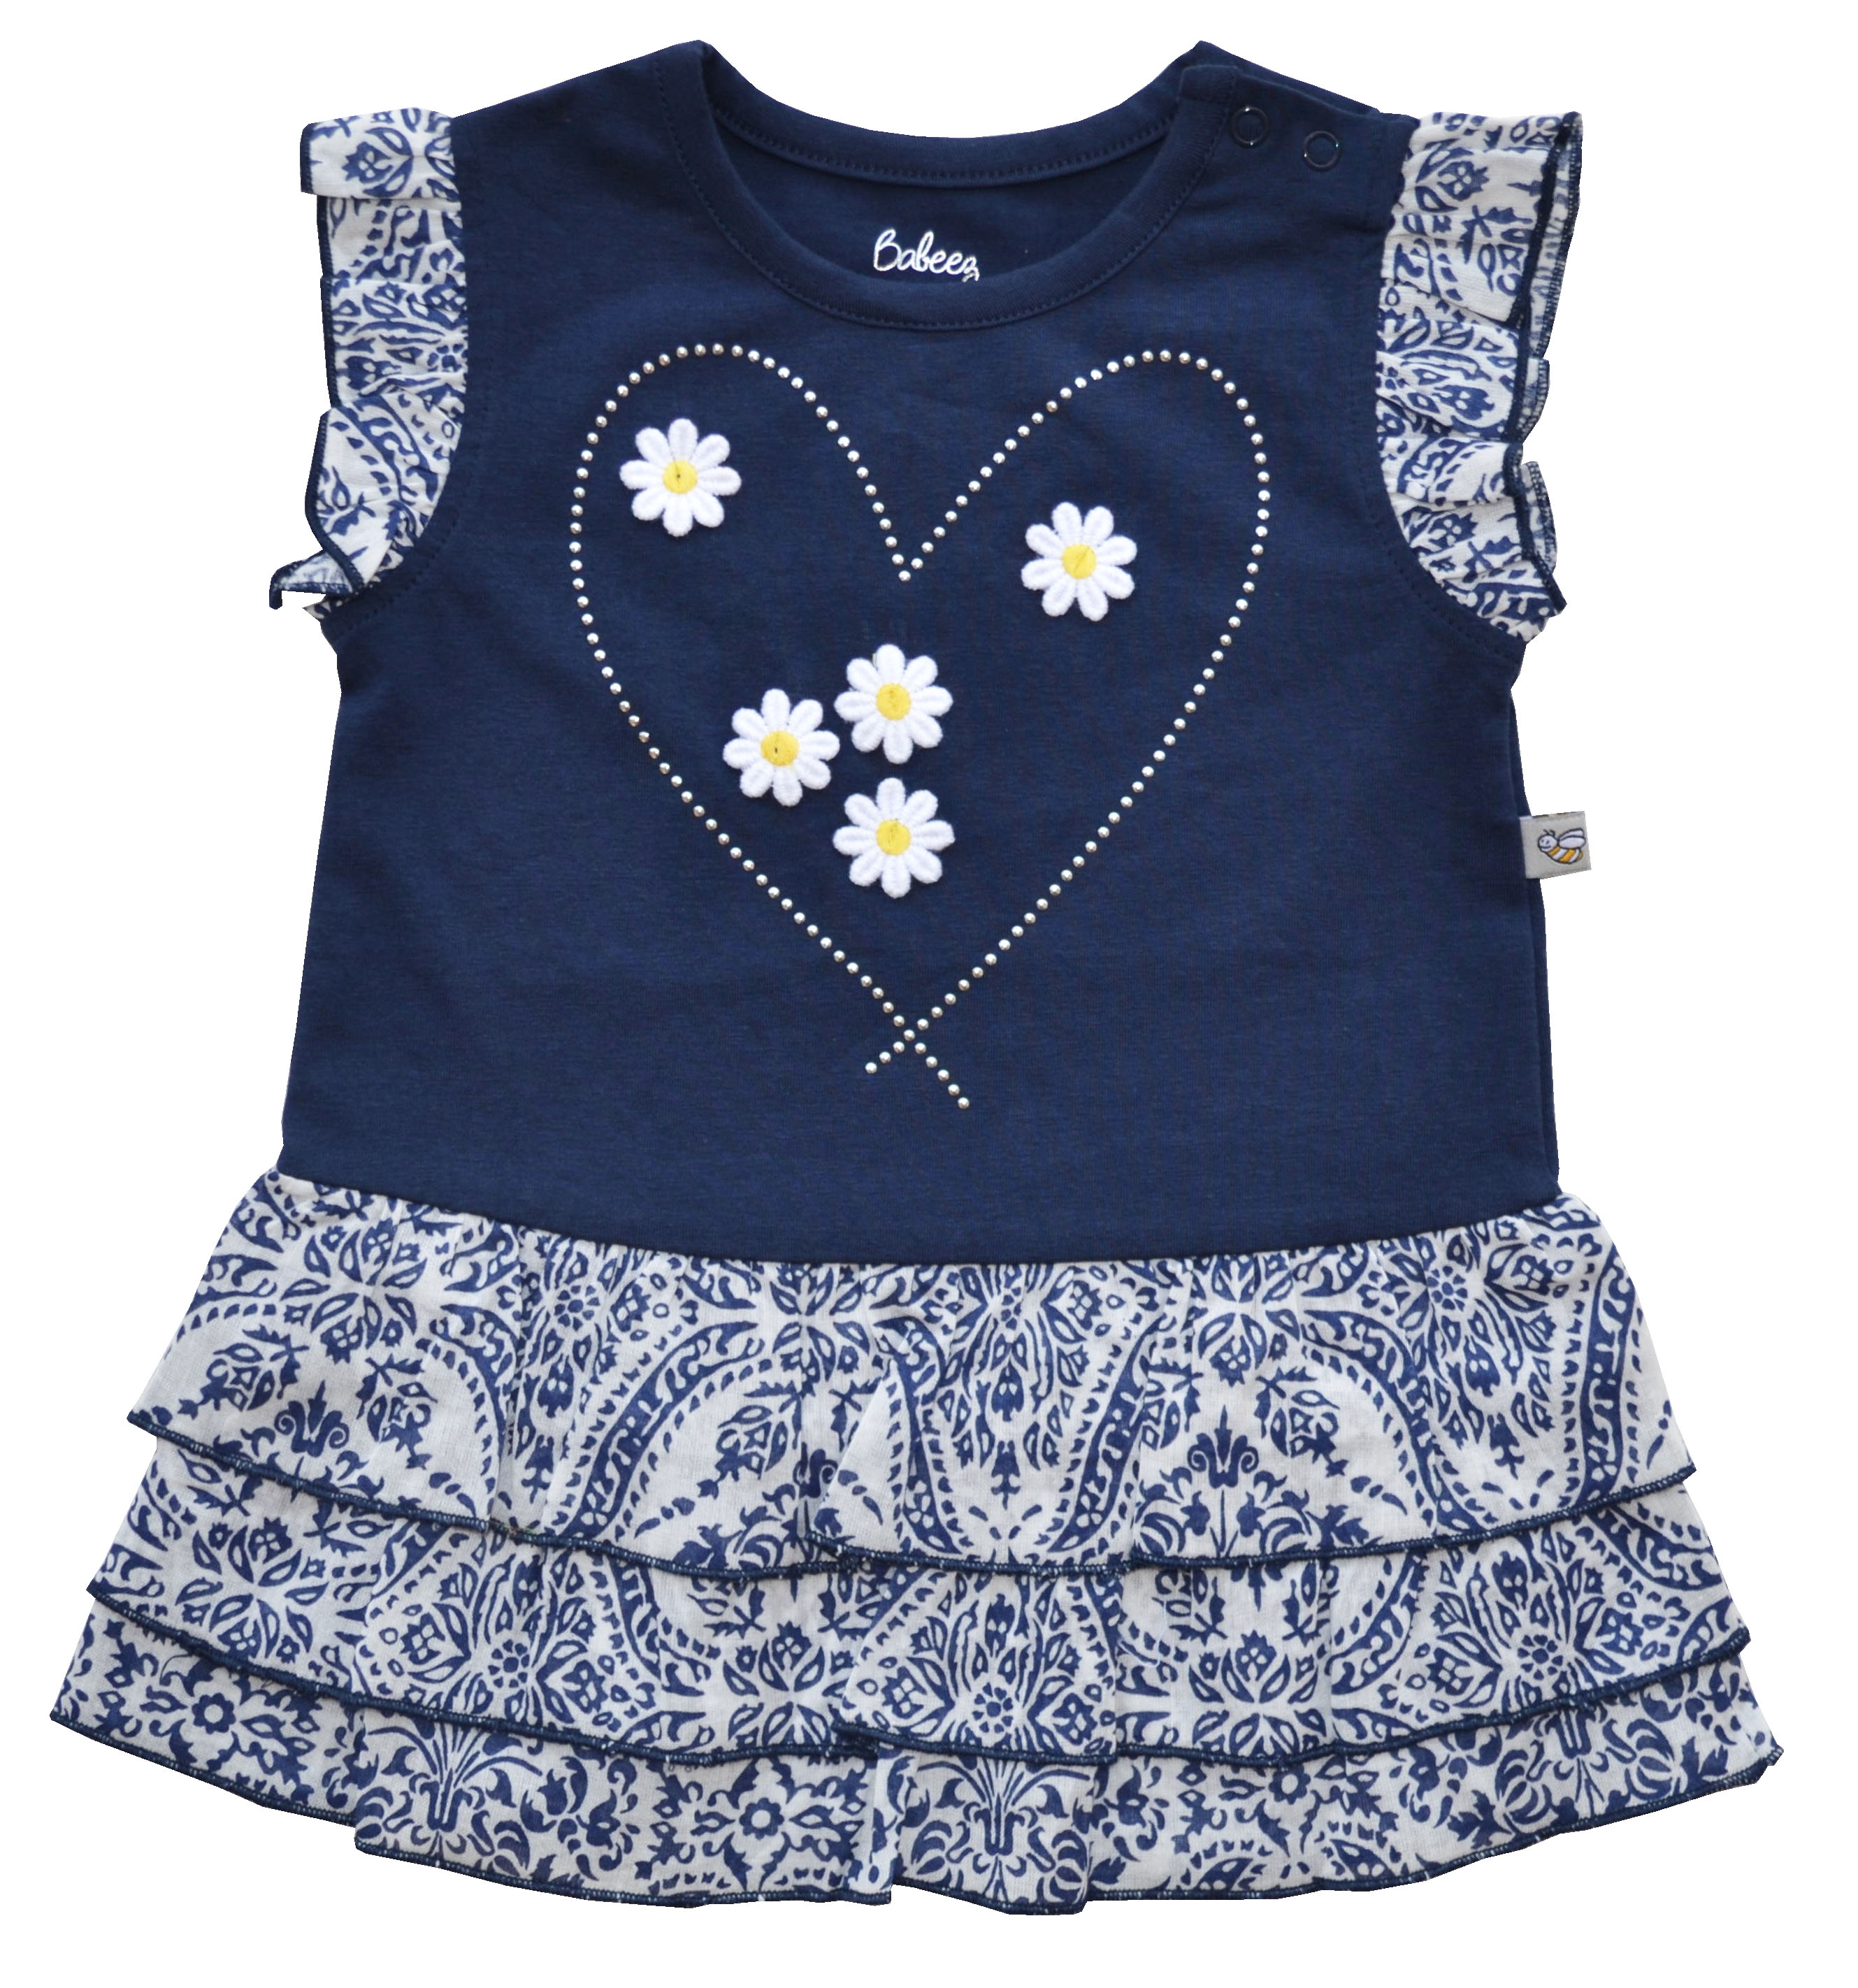 Babeez | Blue Dress with Allover Flower Printed Frills and Flower Applique on Chest (100% Cotton) undefined